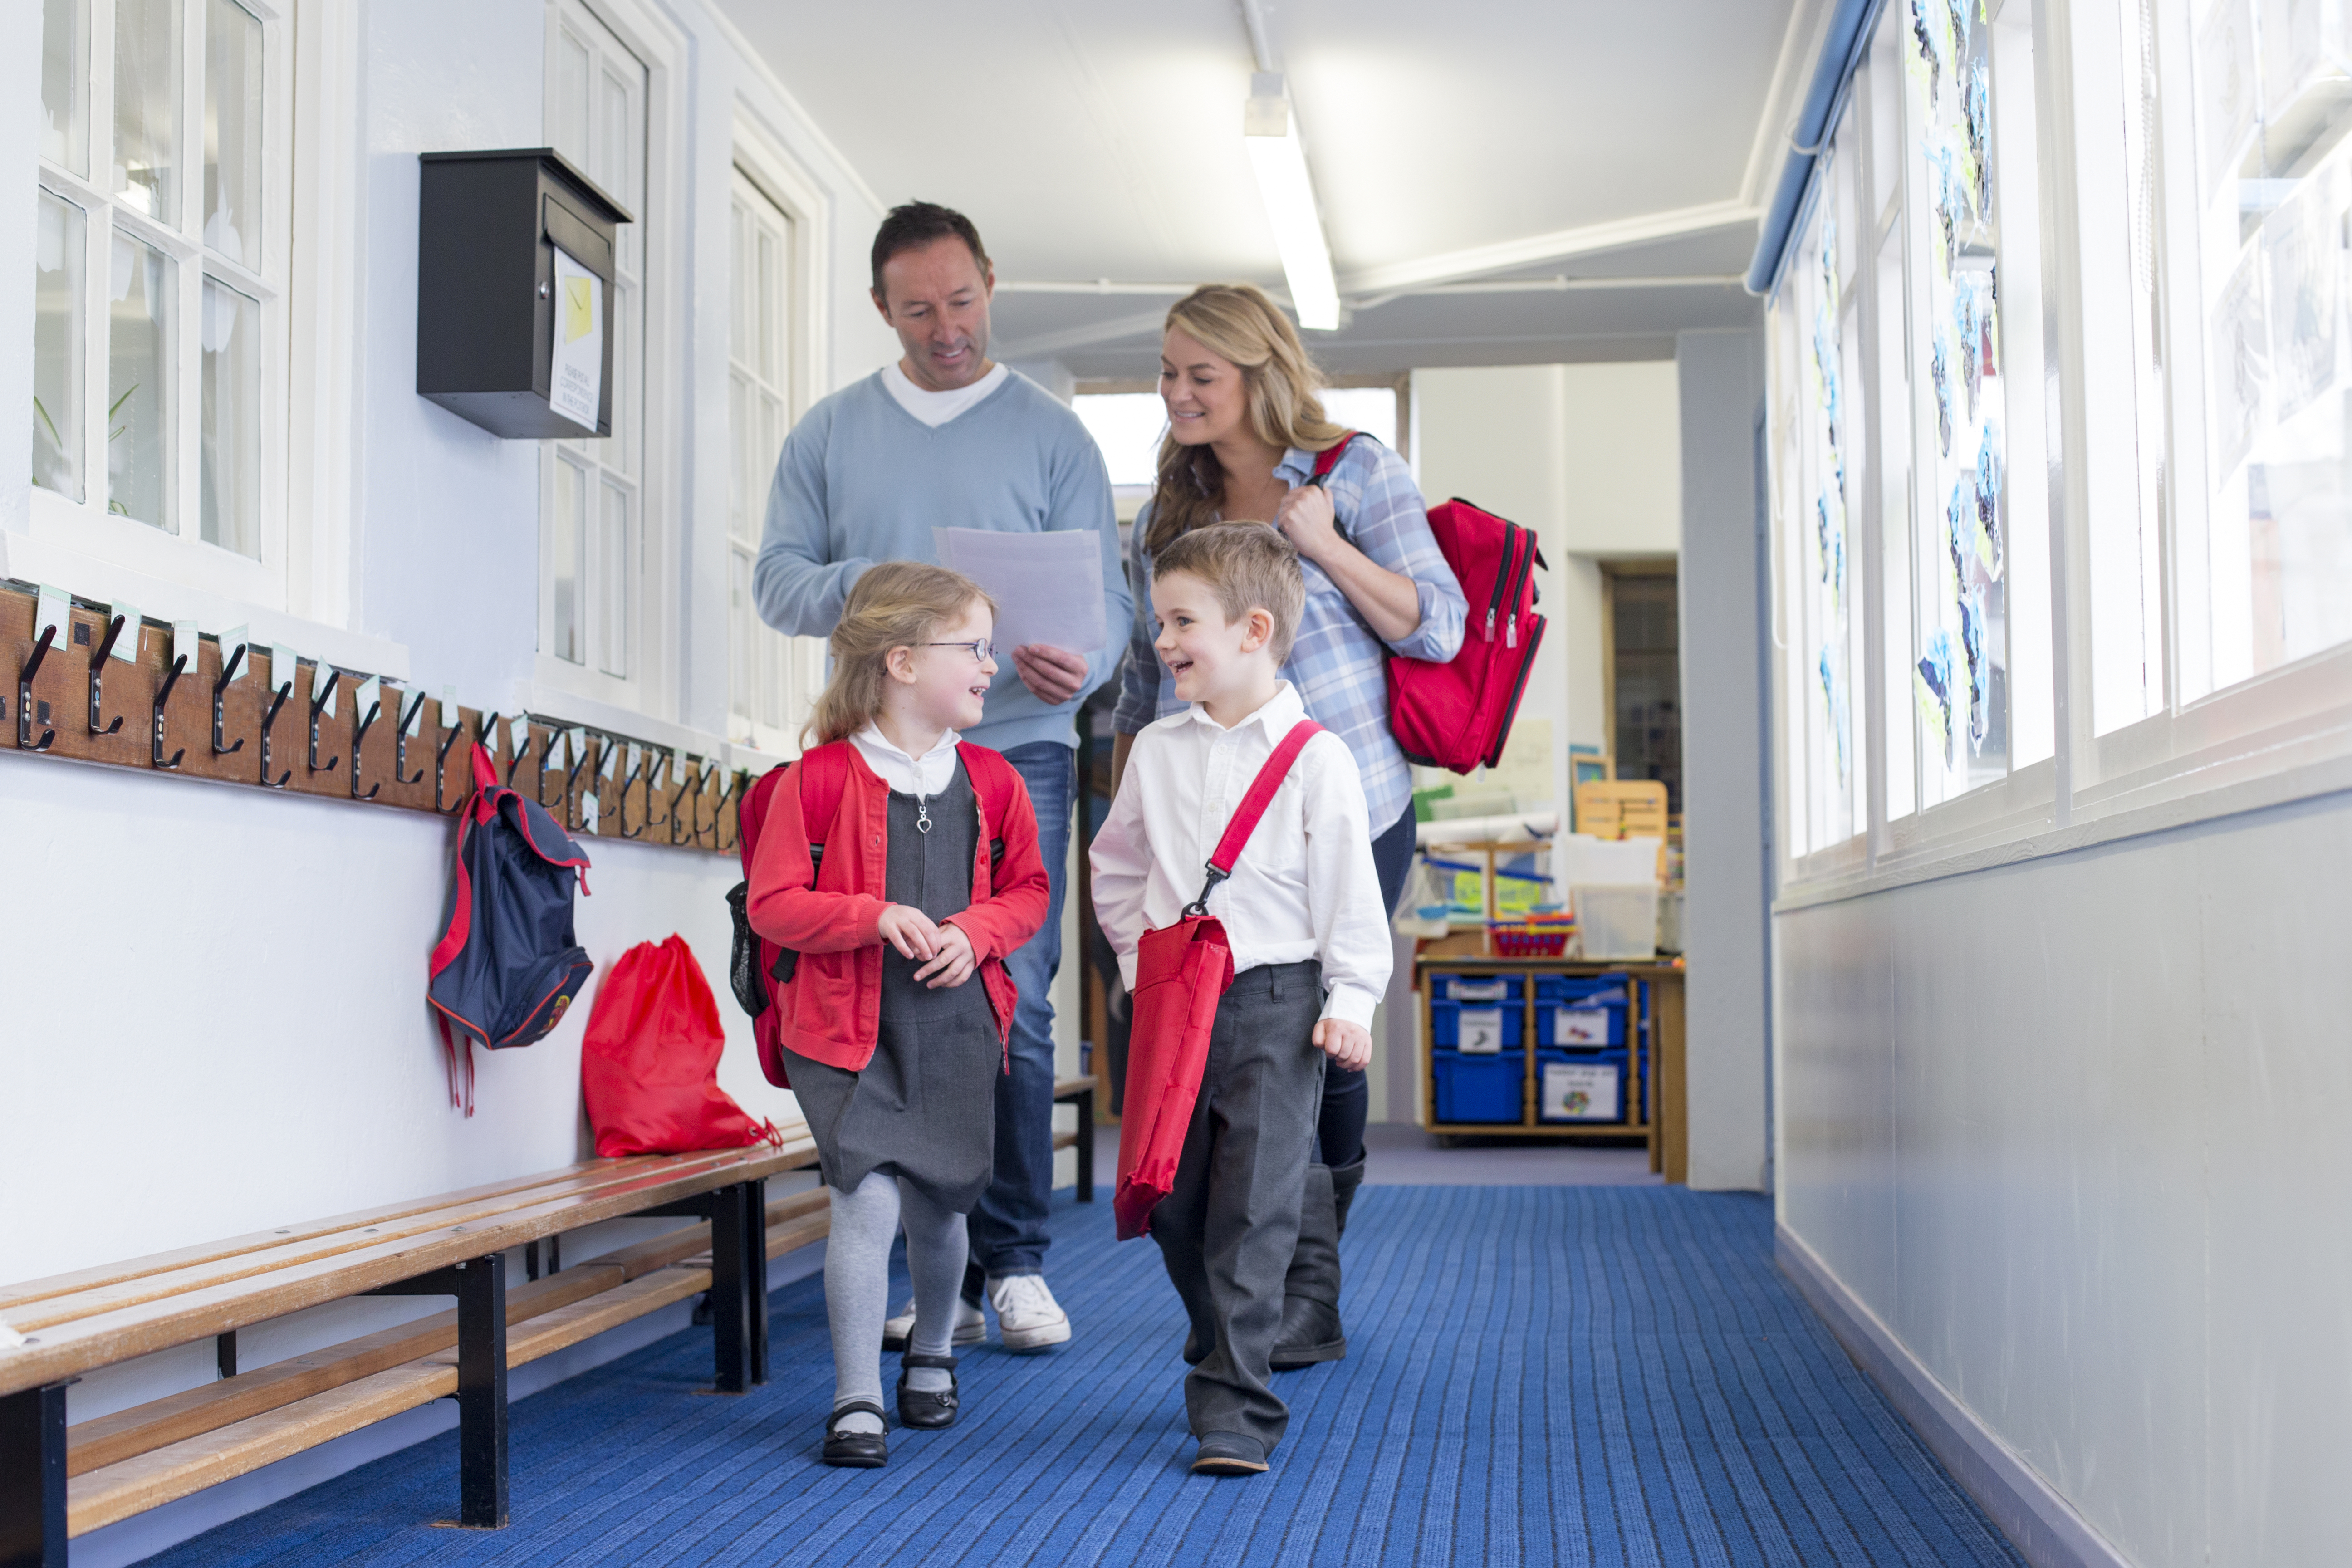 Parents and students walking down a primary school corridor. the parents are looking at some paperwork and the children are talking.